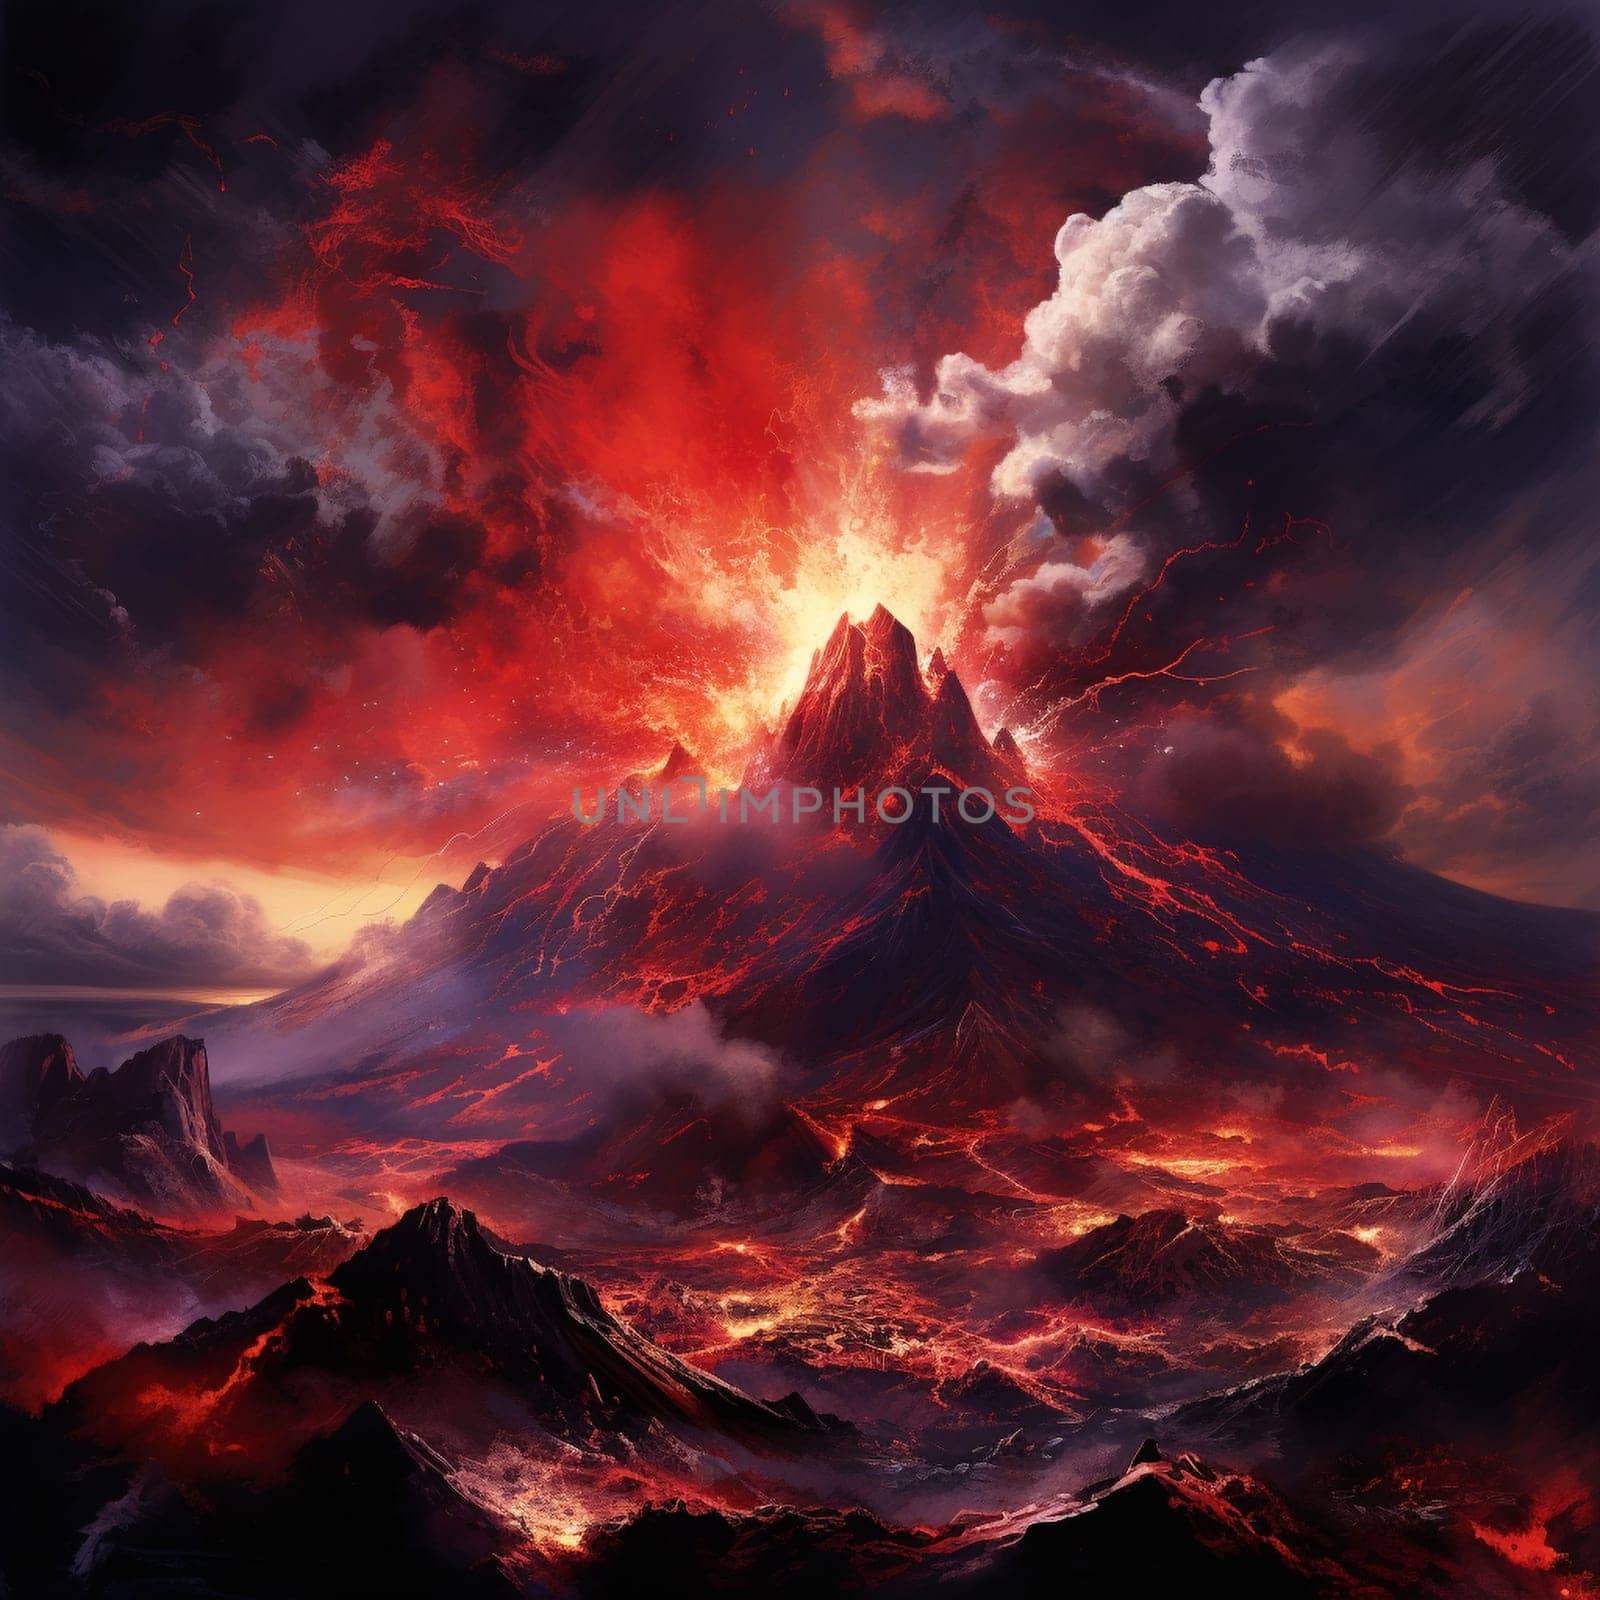 Behold the raw power and intensity of nature's fury in this visually captivating artwork titled 'Scorching Tempest'. This dynamic piece showcases a volcanic eruption with vibrant colors and bold brush strokes, creating a visually stunning depiction of the cataclysmic event. Lava spews from the volcano, engulfing the scene in fiery hues, while billowing clouds of smoke create an ominous atmosphere. In the foreground, glowing embers flicker and float, adding to the sense of danger and awe. The backdrop features a silhouetted landscape, accentuating the scale and magnitude of the eruption. Frightened onlookers can be seen in the distance, their tiny figures serving as a reminder of the immense power of nature. The composition is carefully balanced, drawing the viewer's attention and inviting them to pause and marvel at this breathtaking display of nature's might.